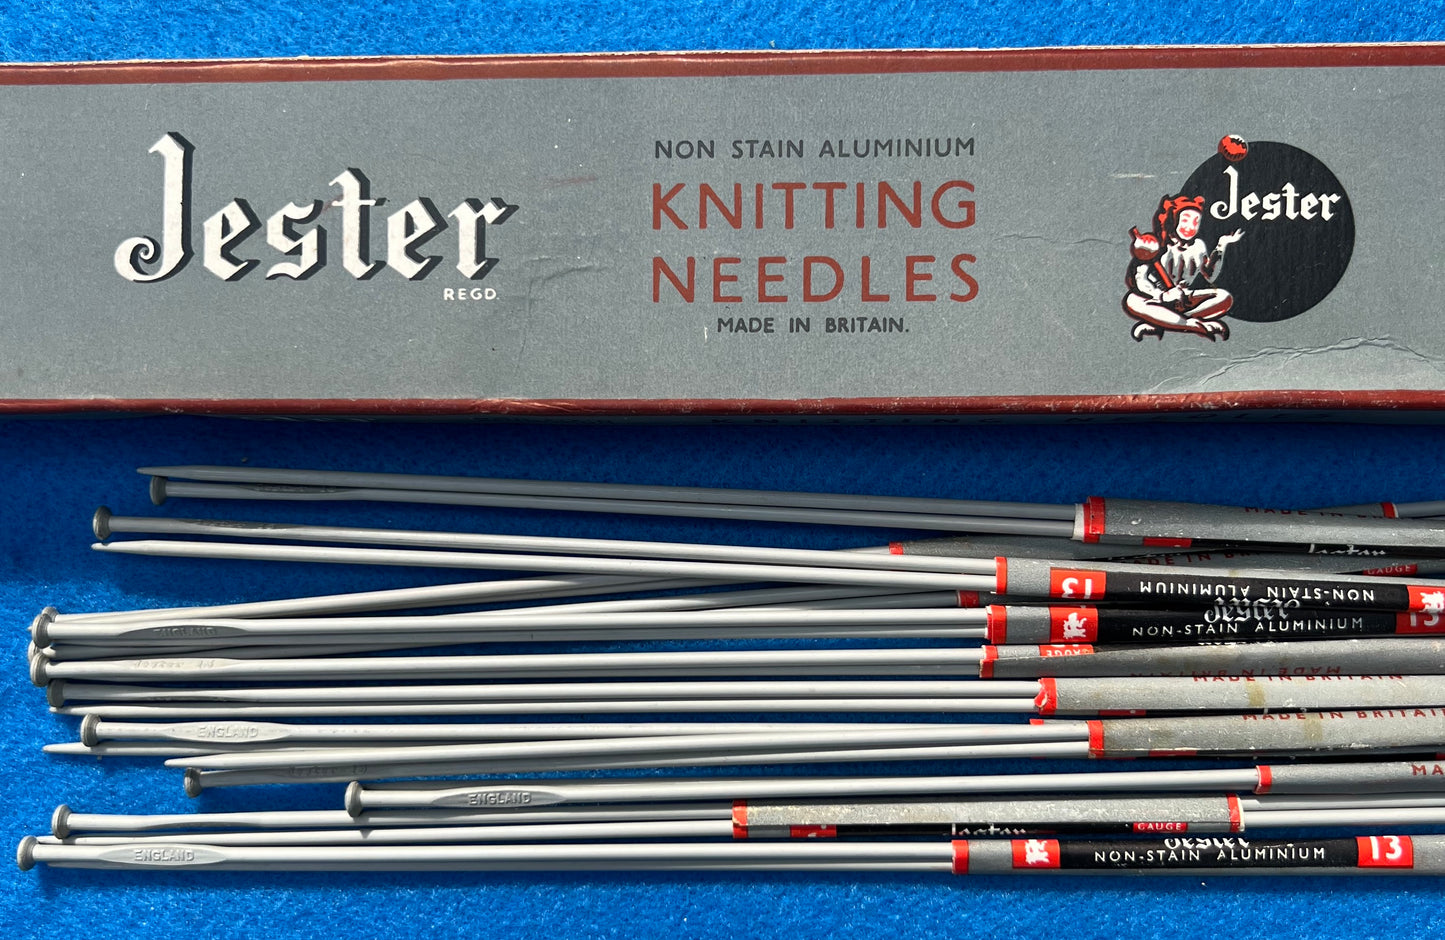 Lovely old JESTER Box with 12 pairs of 14" Knitting Needles